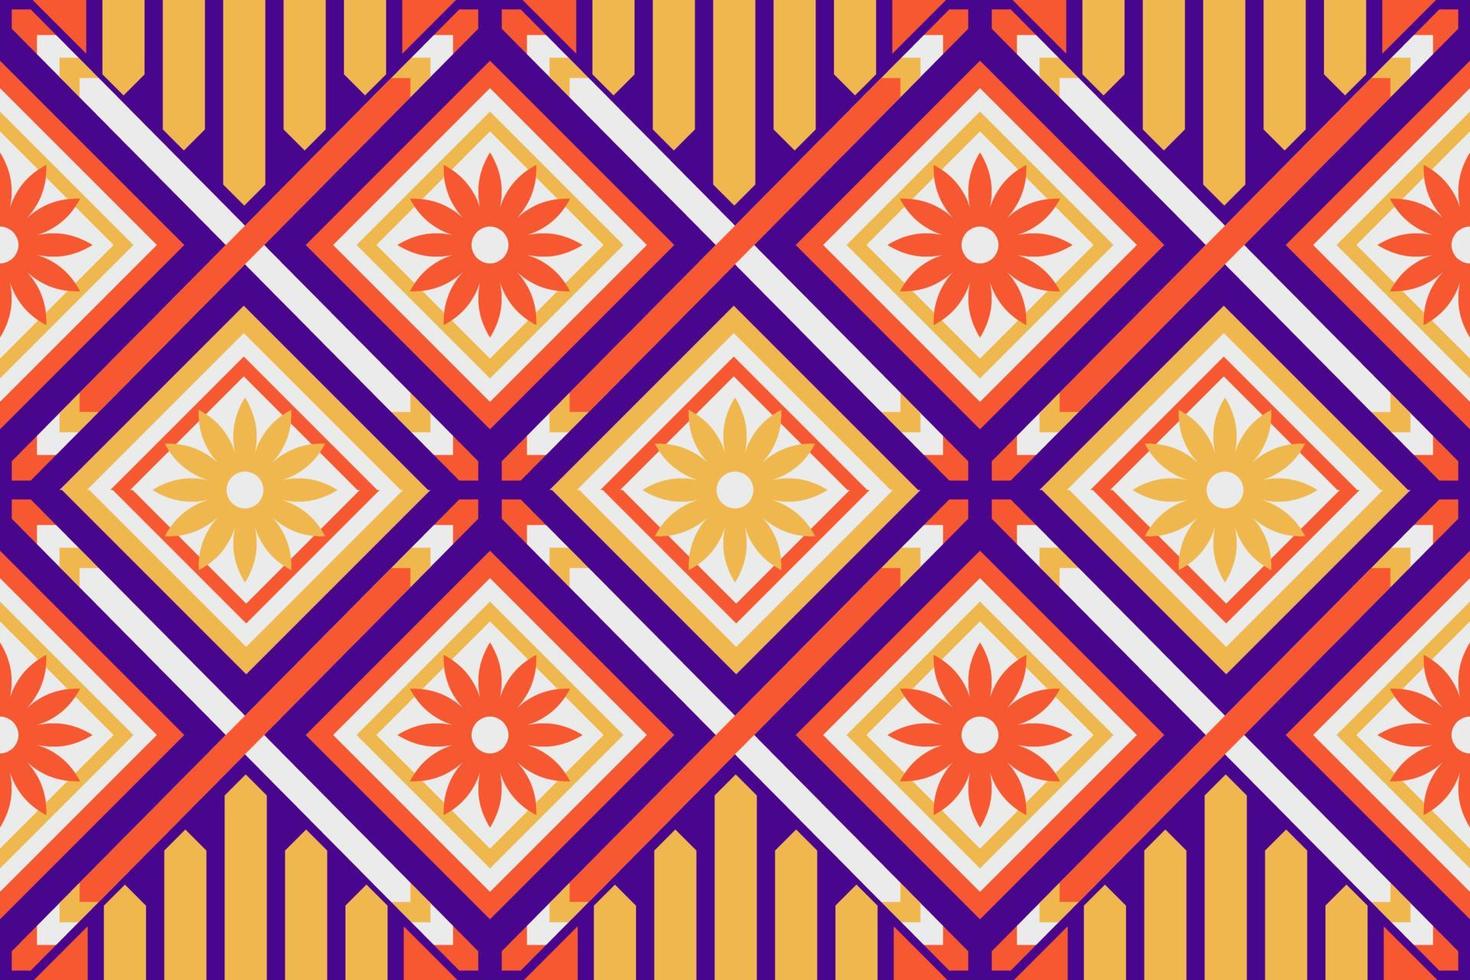 Colorful geometric ethnic seamless pattern designed for background, wallpaper, traditional clothing, carpet, curtain, and home decoration. vector